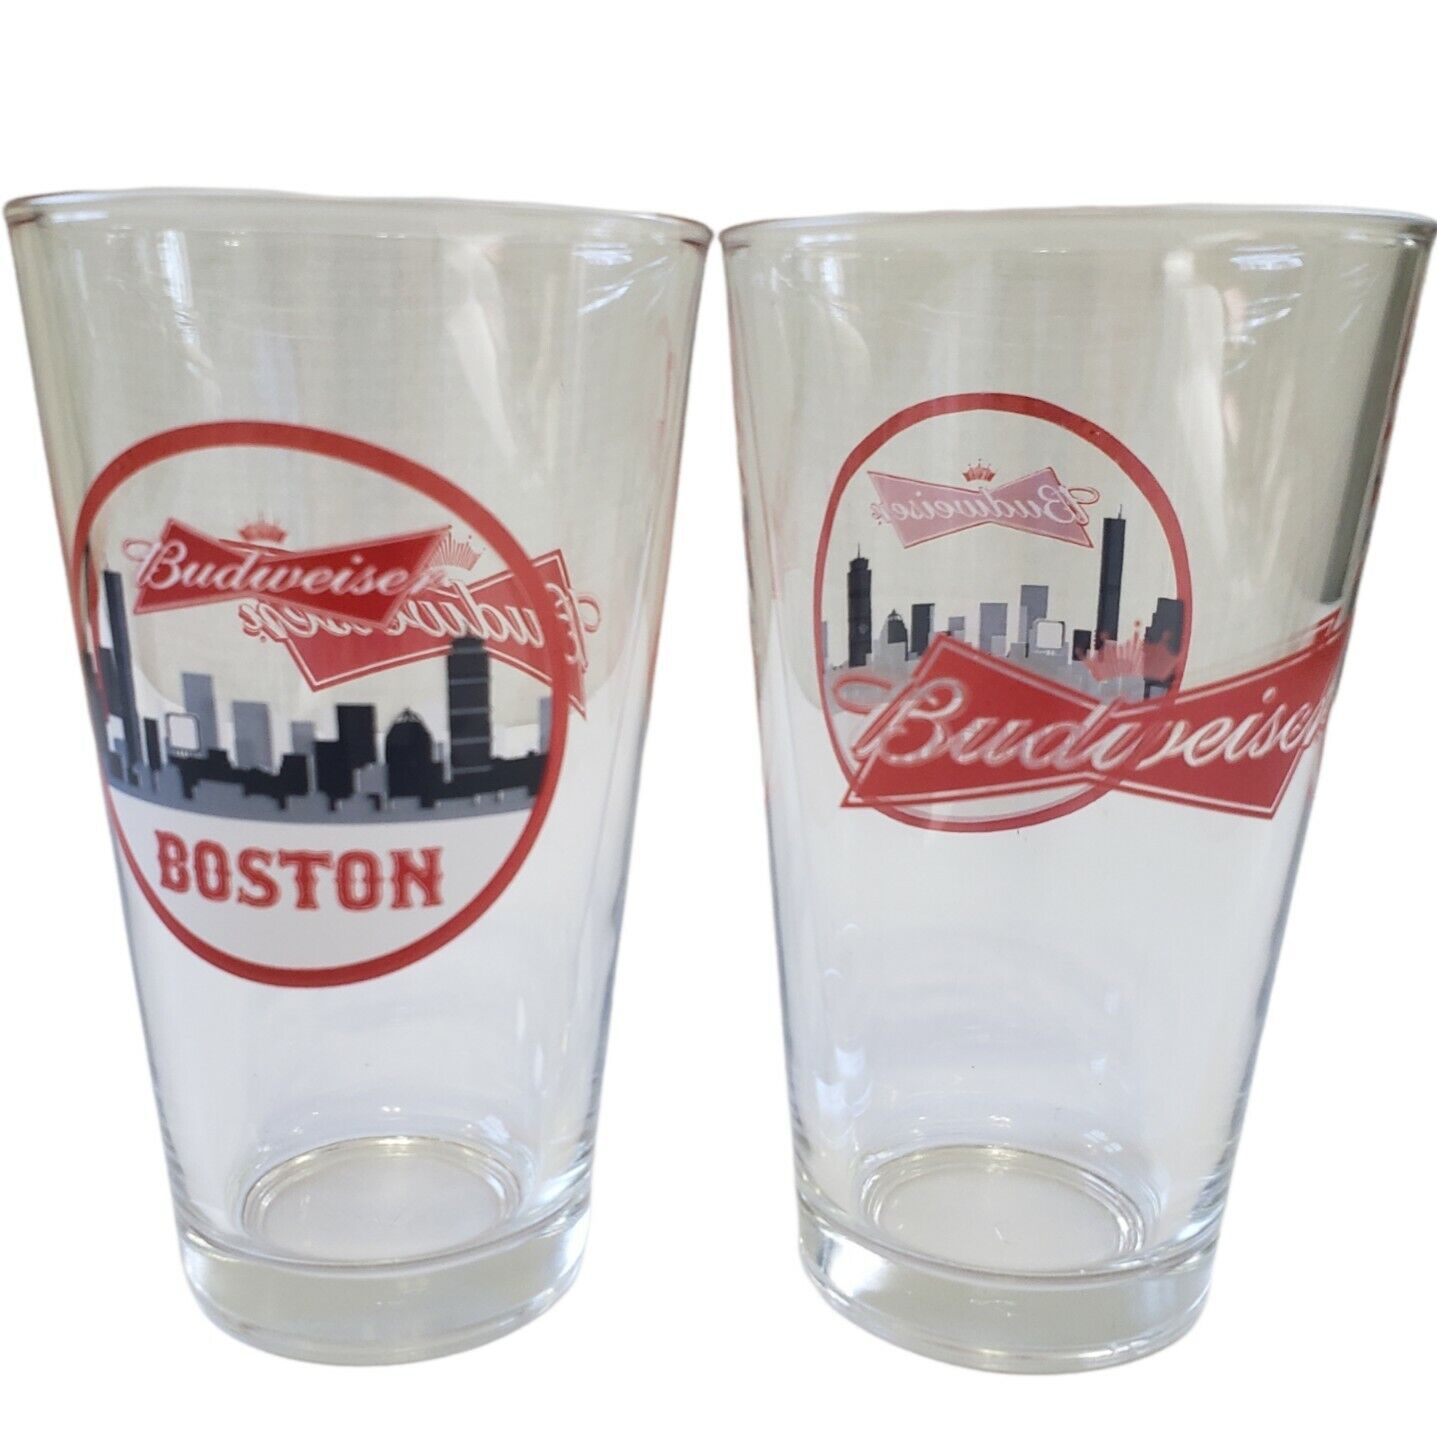 Budweiser Boston 16 oz Pint Beer Clear Glasses Set Of Two Six Inches High New